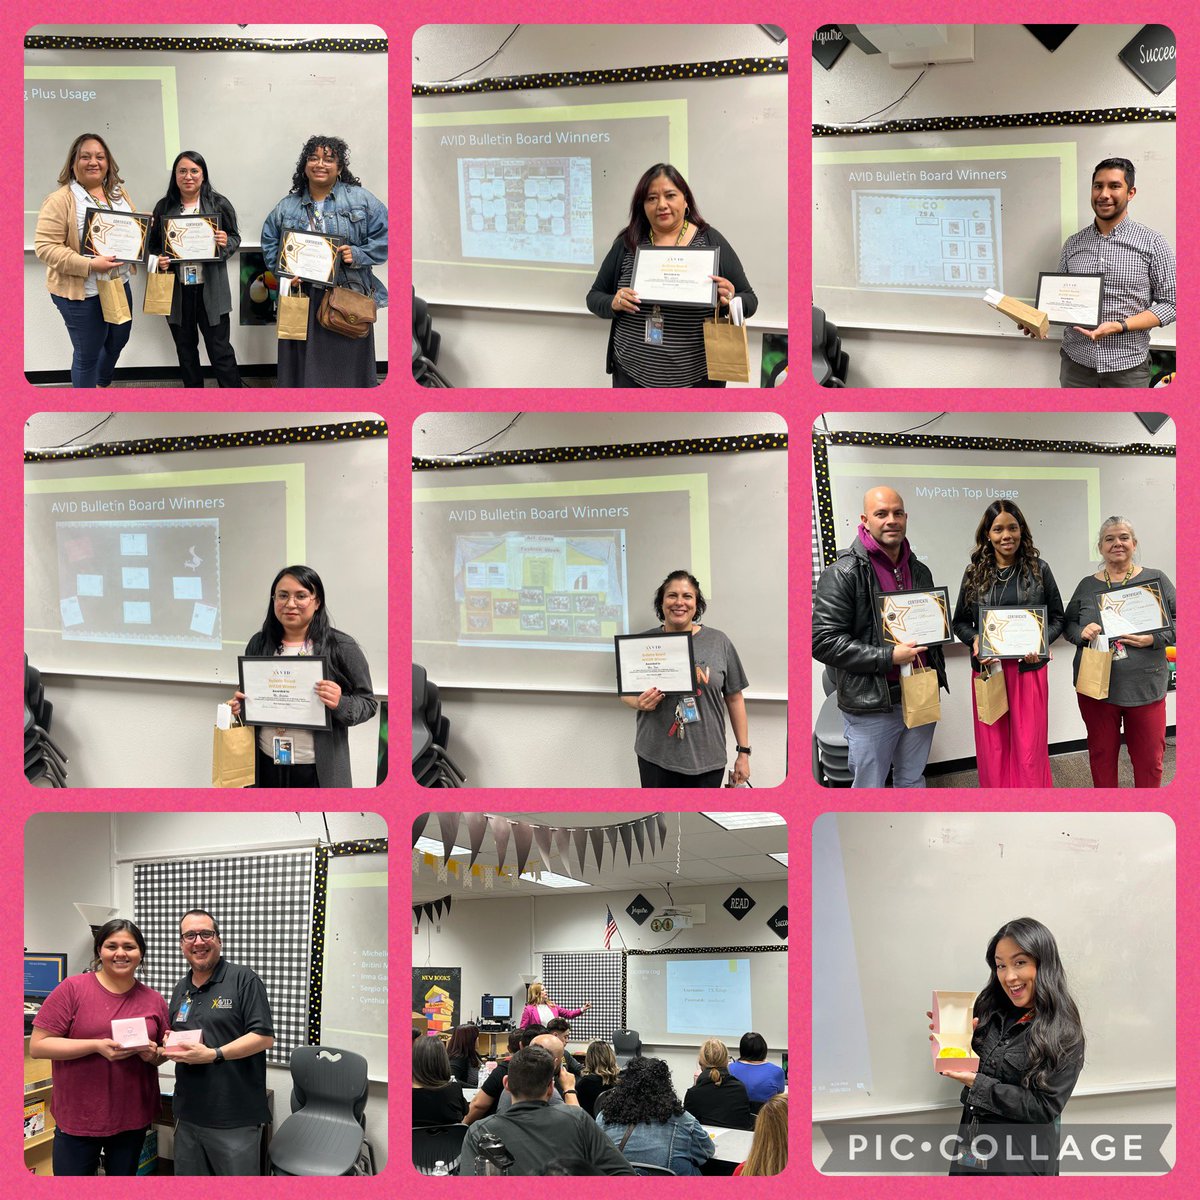 Action packed February Faculty Meeting with a little bit of testing and a WHOLE LOT of celebrations!! #MissionPossible
💖Reading Plus Usage
💖MyPath Usage
💖February Birthdays🎂
💖Top WICOR Bulletin Boards
@MChavez_AMS @iGalindo_AMS @JEspinoza_AMS @SVarela_AMS